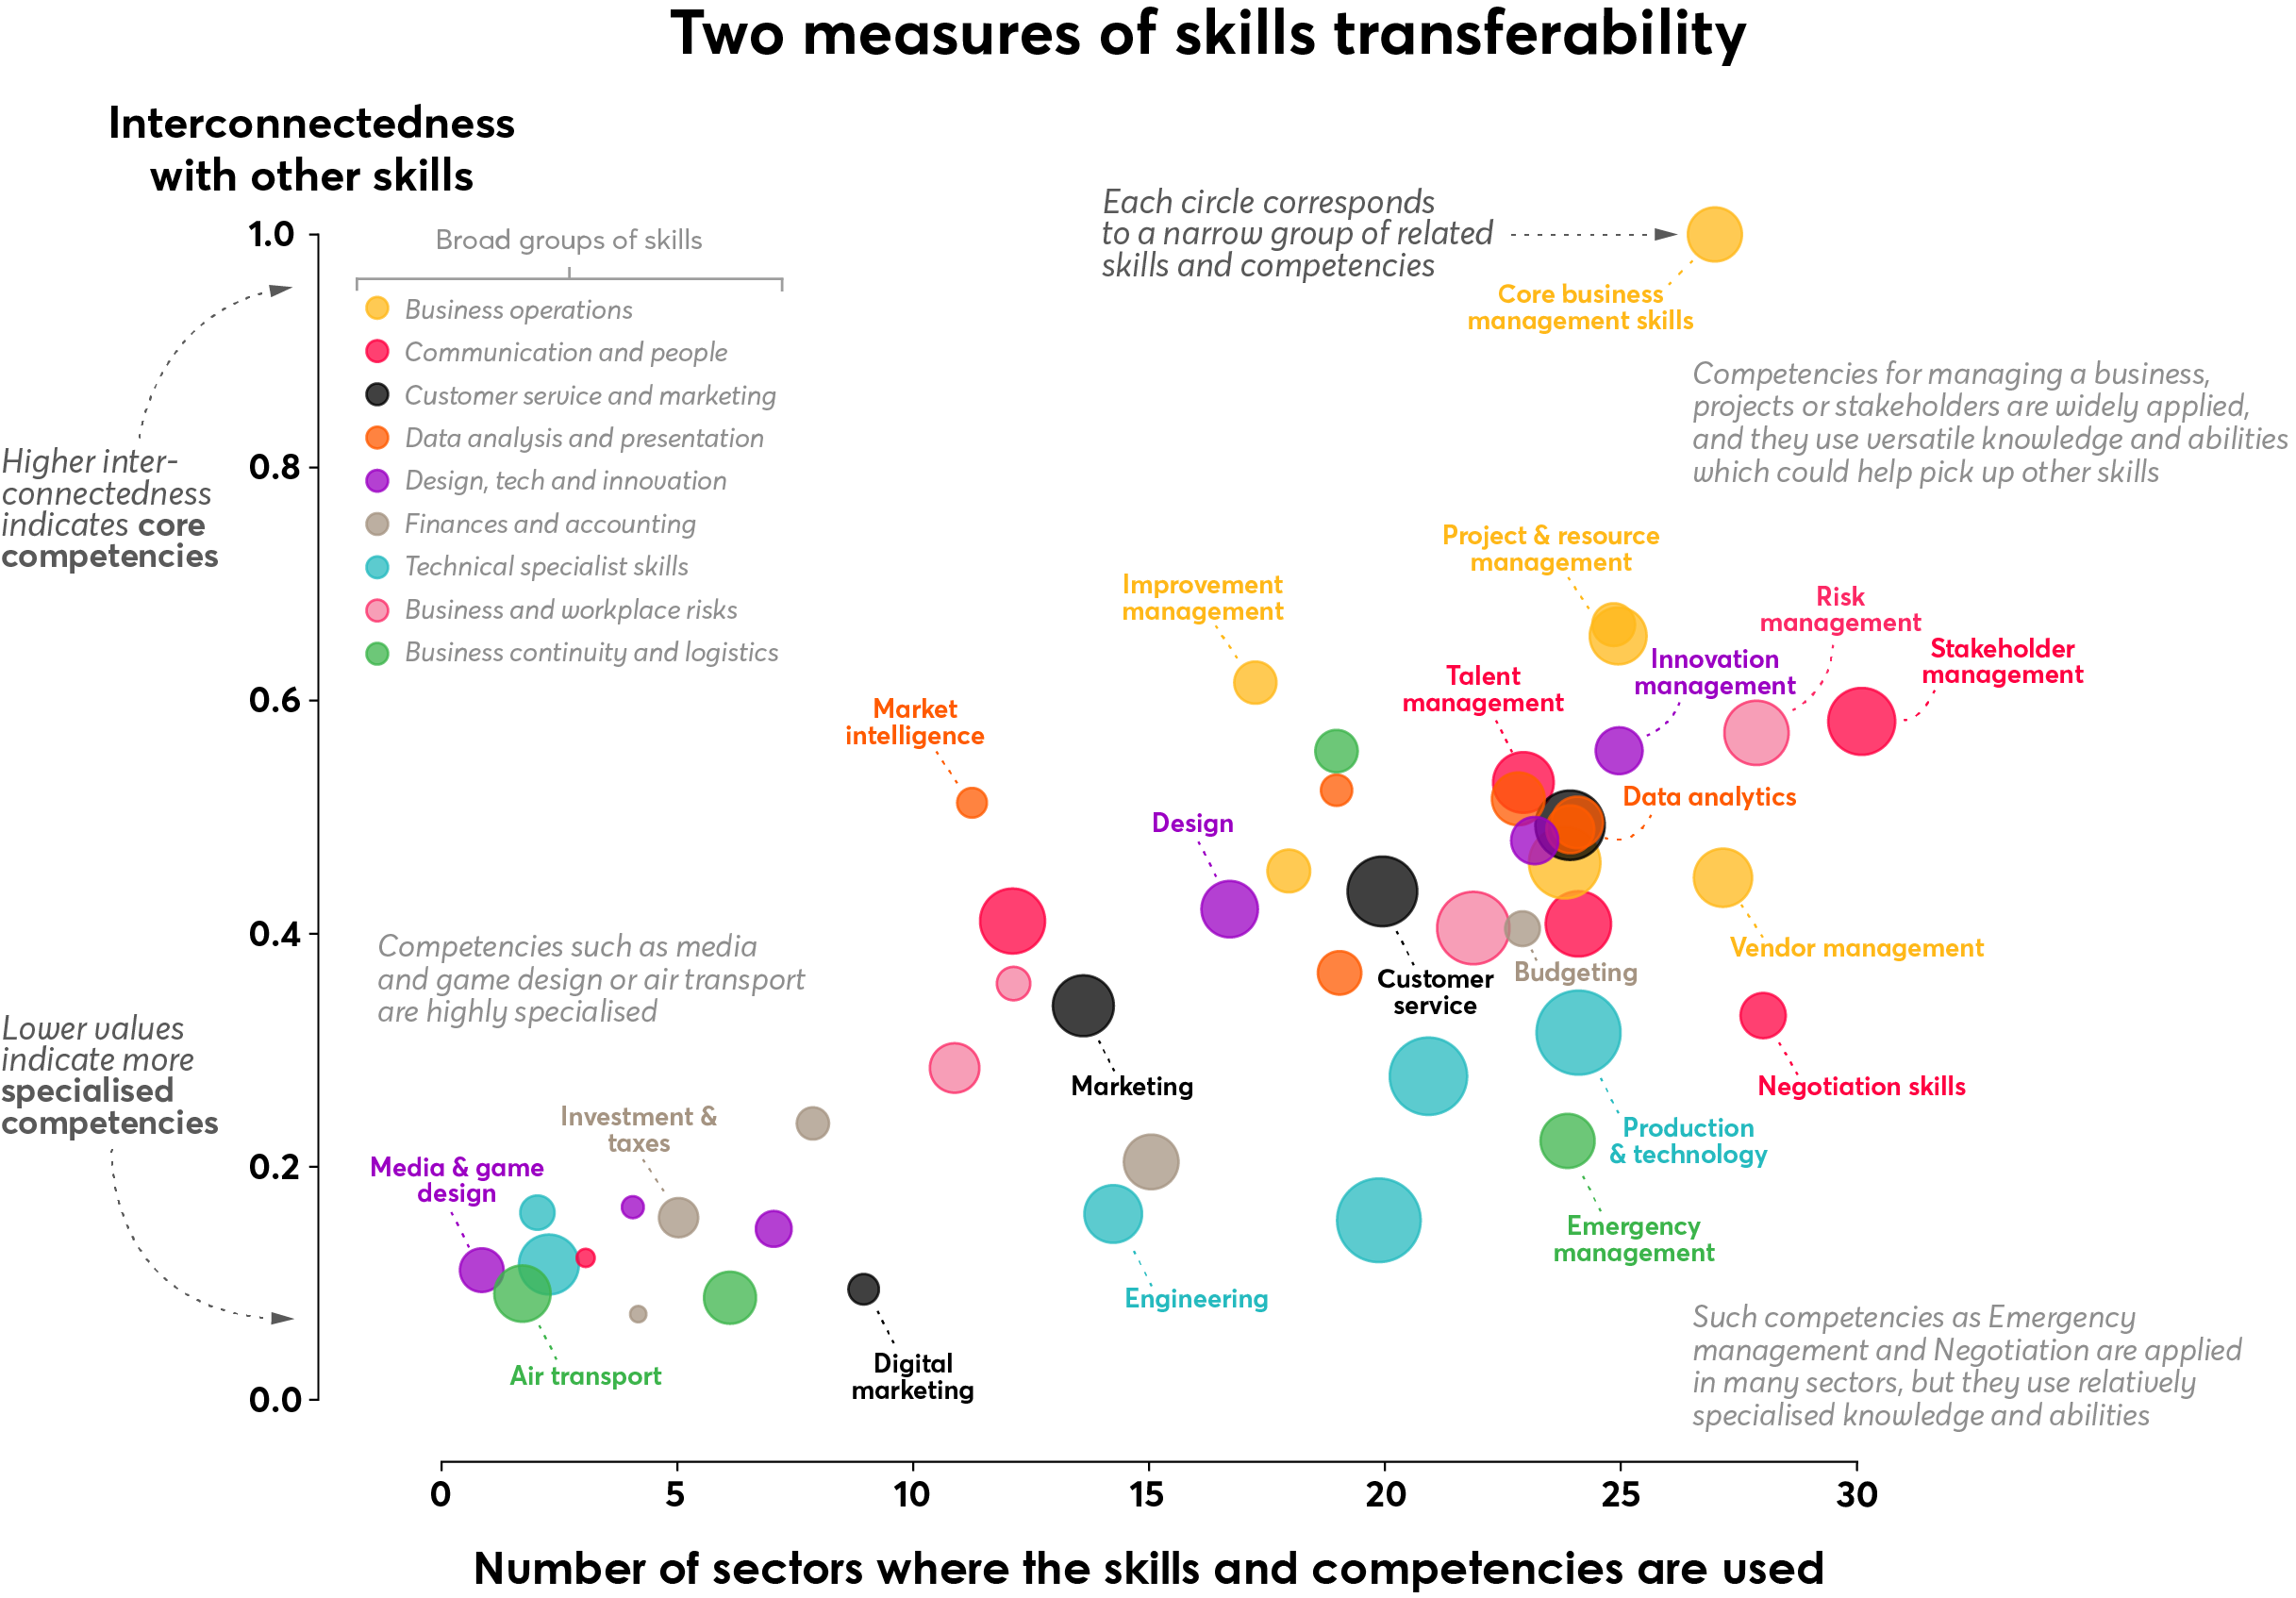 A chart showing two measures of skills transferability for a range of differen jobs